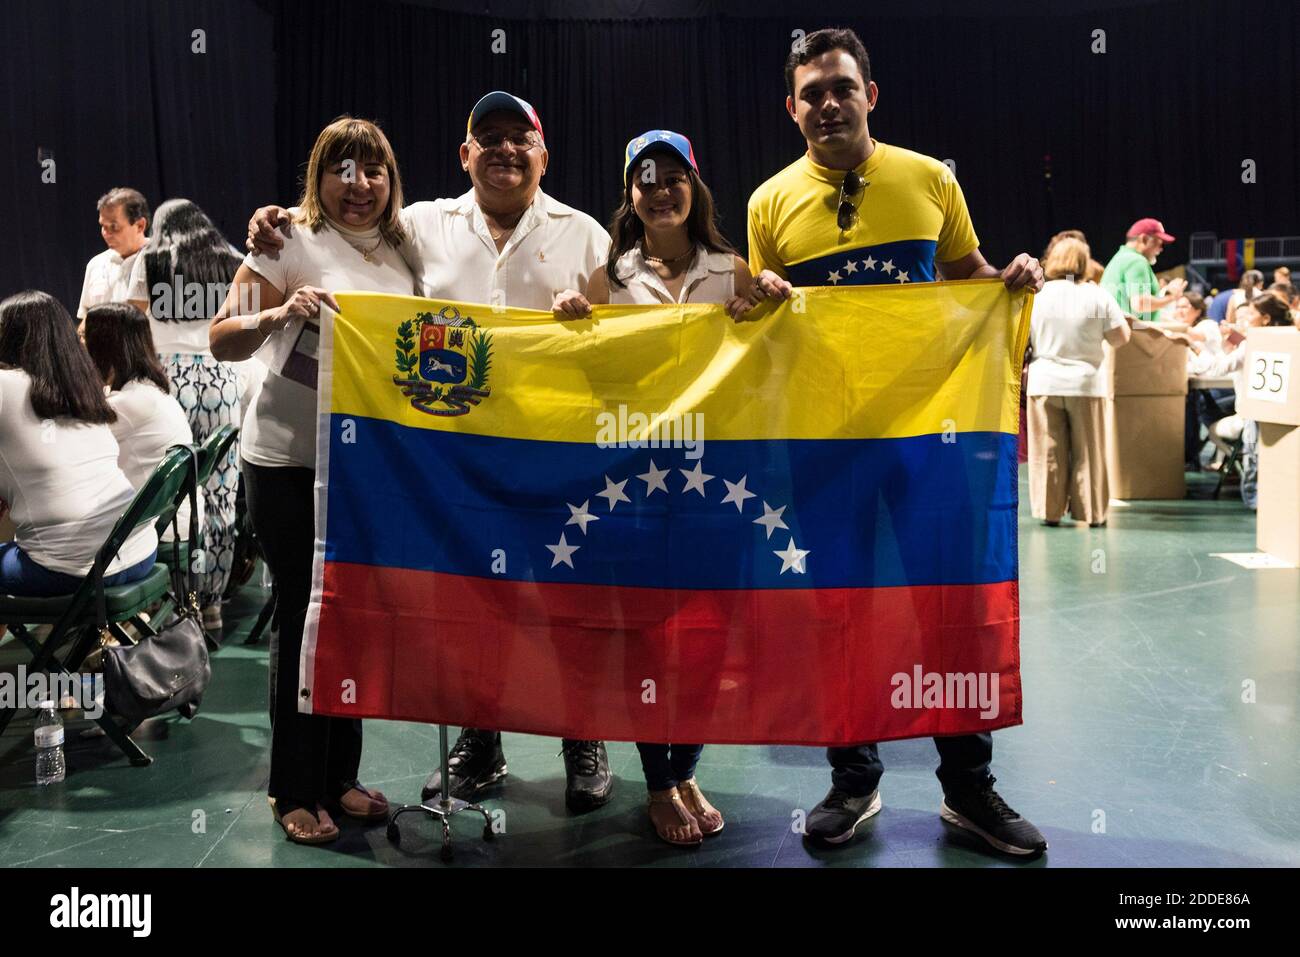 NO FILM, NO VIDEO, NO TV, NO DOCUMENTARY - Maritza Heredia, Eddison Heredia, Janale Carruyo and Orlando Jimenez hold up a Venezuelan flag after voting in the country's referendum at the Watsco Center in Coral Gables on Sunday, July 16, 2017. Photo by Bryan Cereijo/Miami Herald/TNS/ABACAPRESS.COM Stock Photo